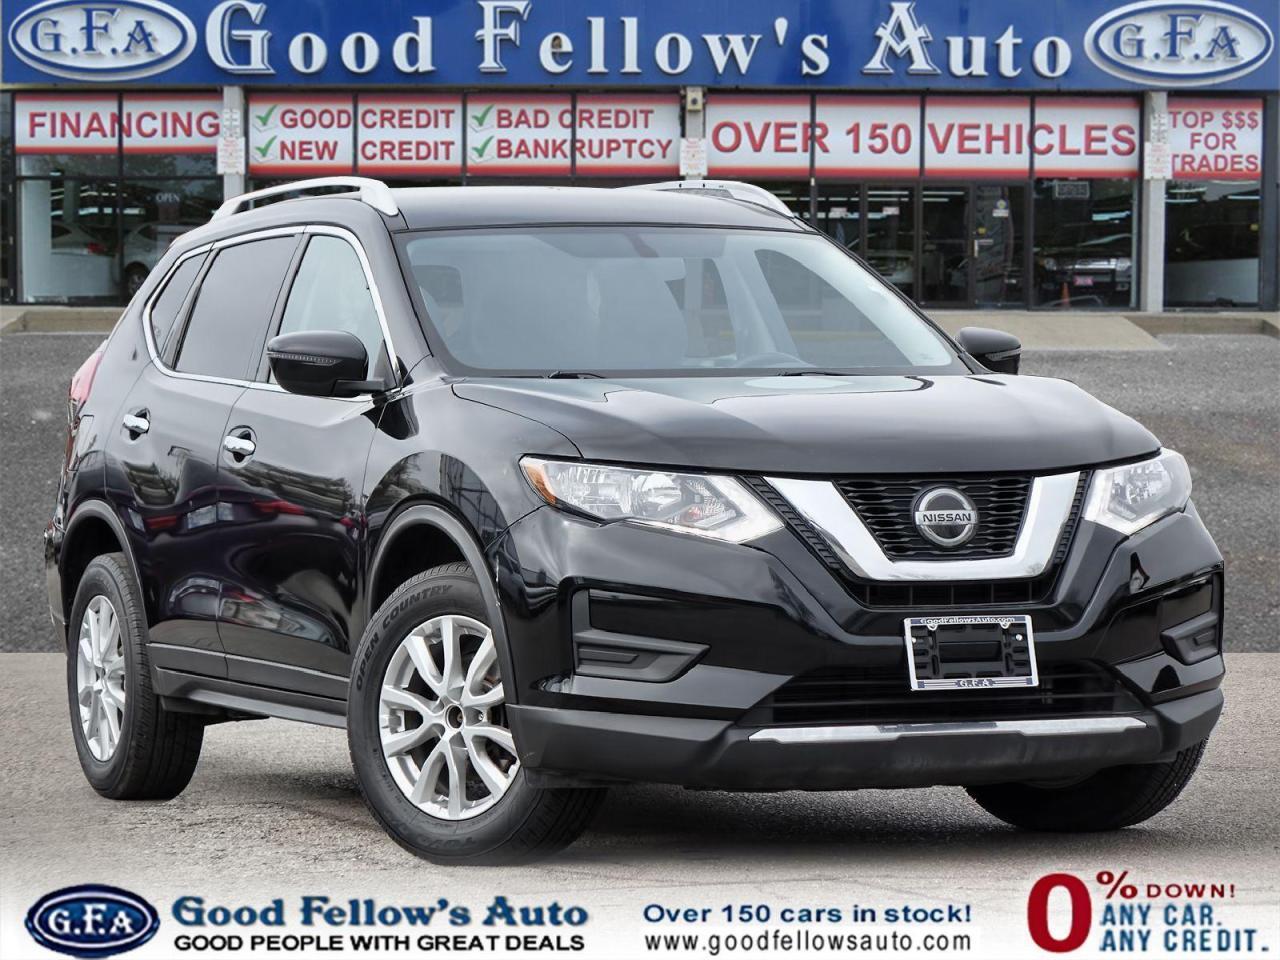 2020 Nissan Rogue SPECIAL EDITION, AWD, REARVIEW CAMERA, HEATED SEAT